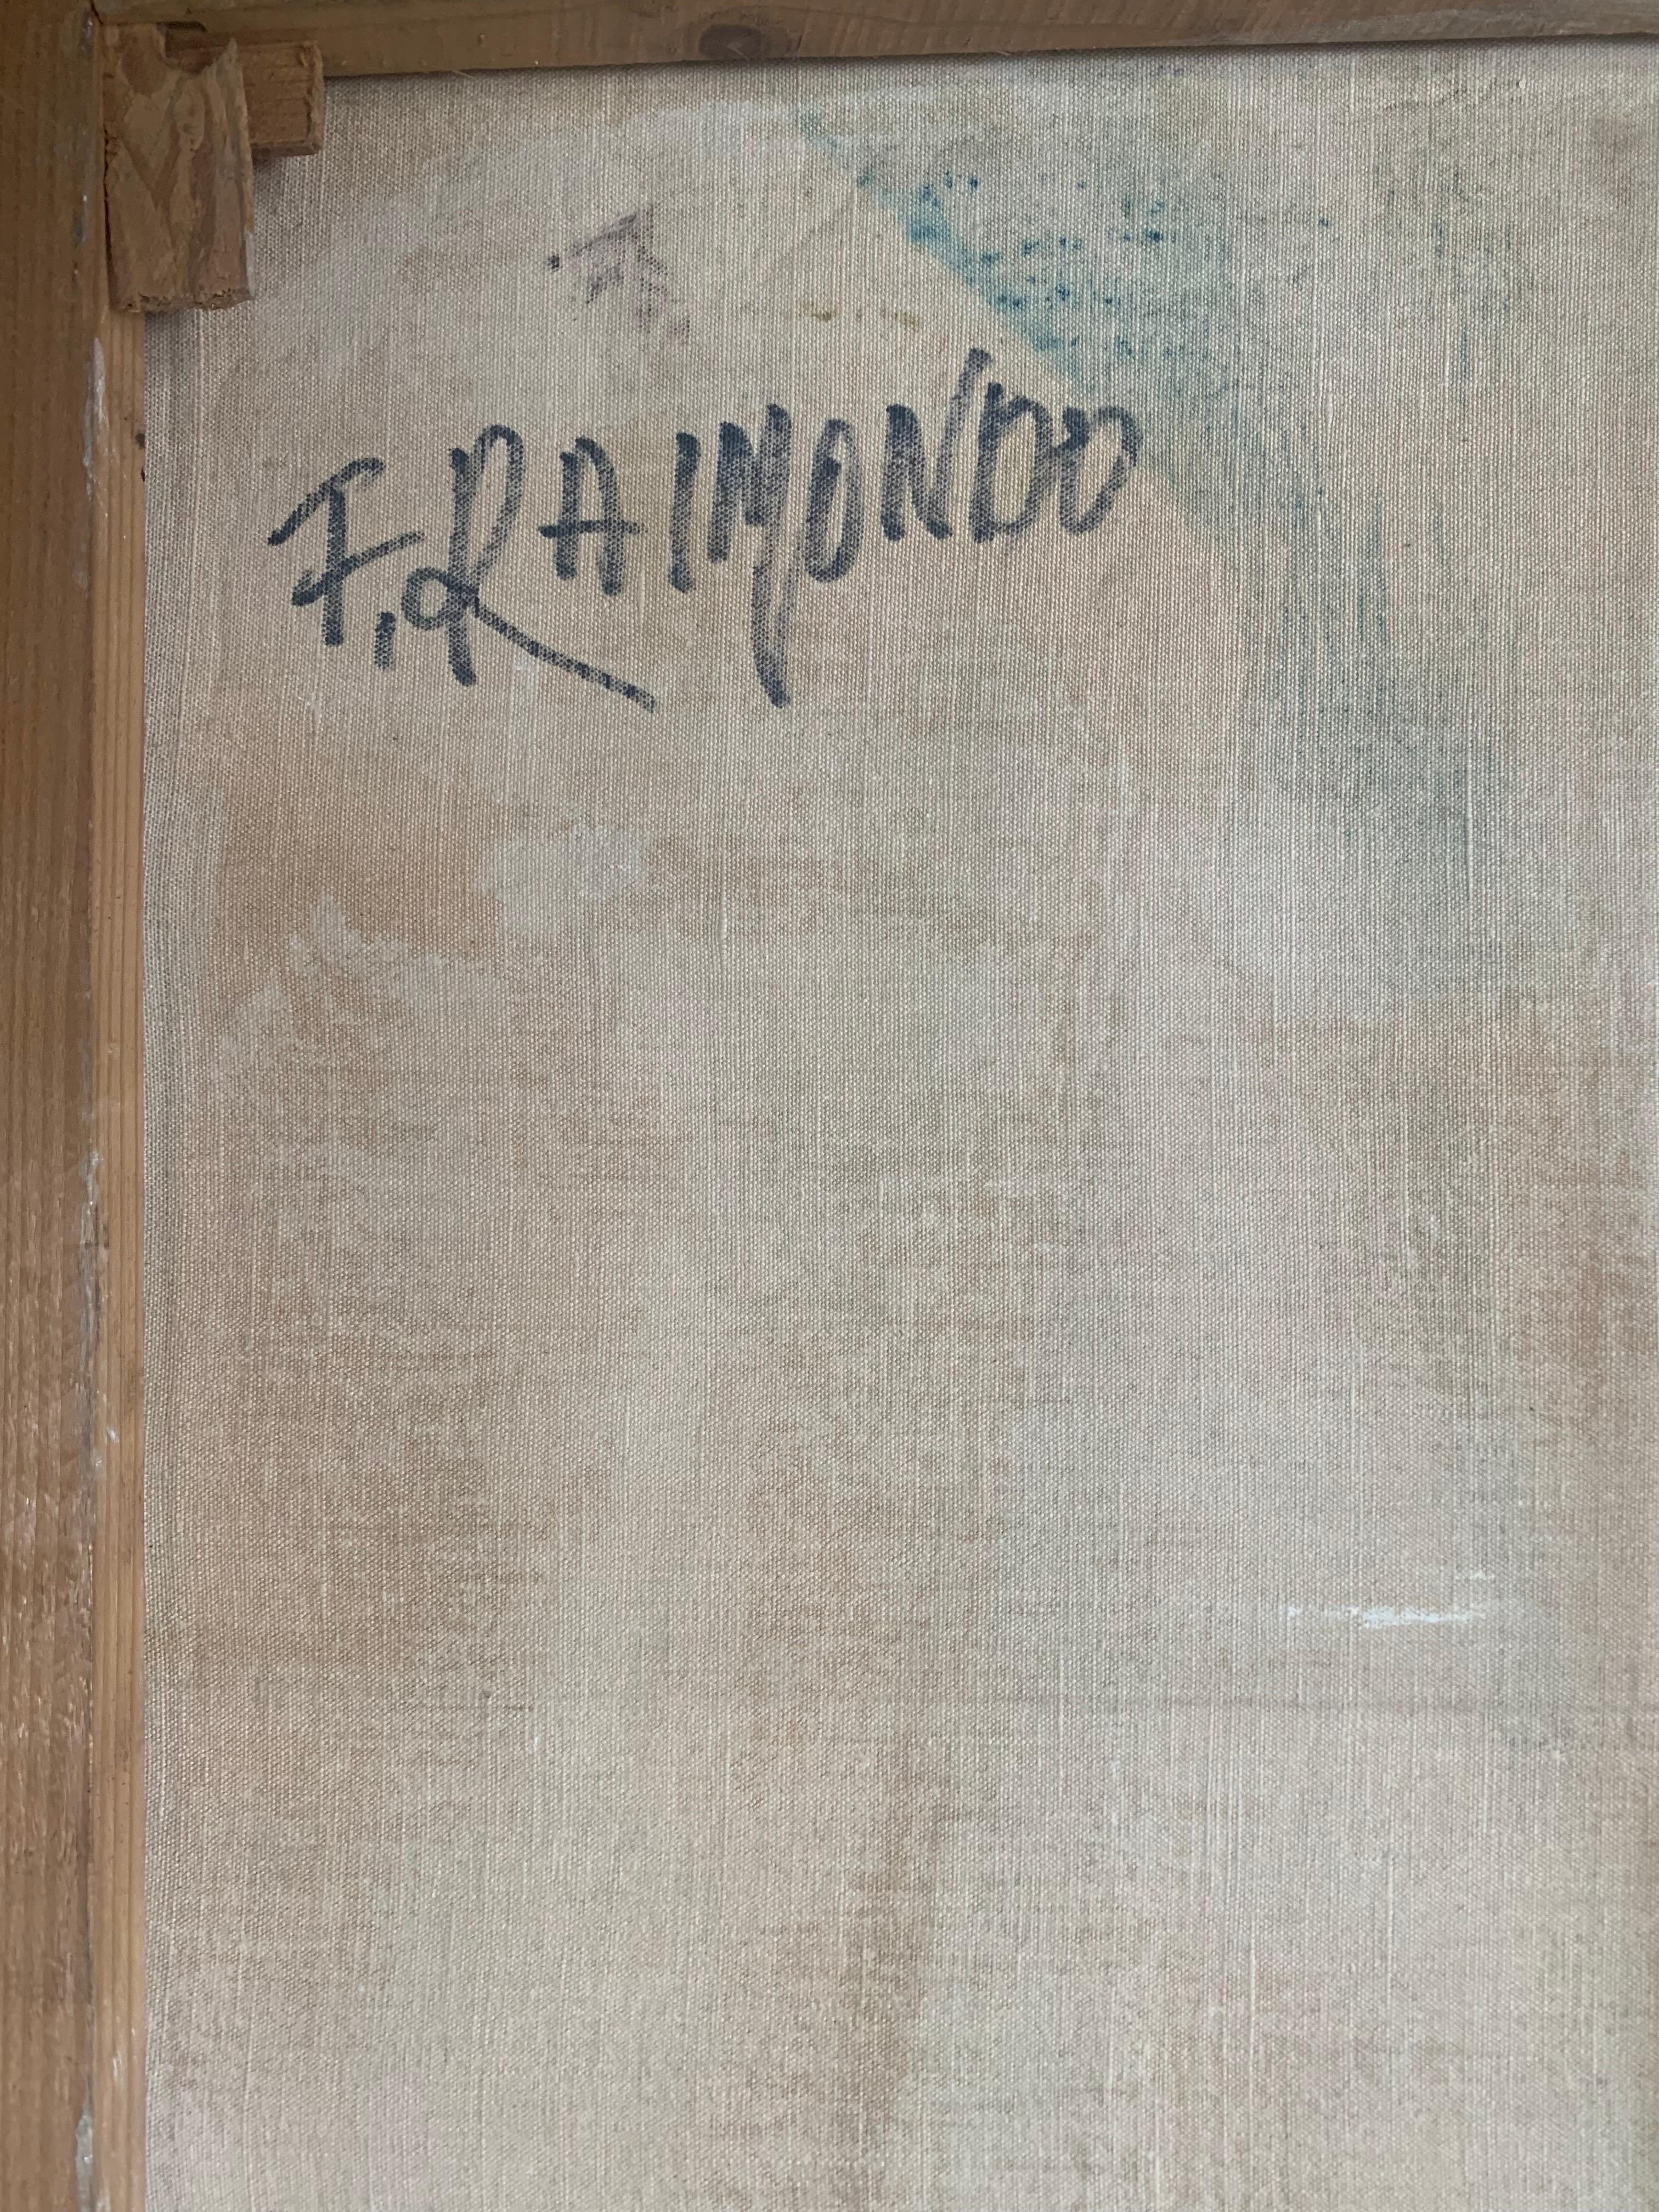 Abstract Painting With Rolled painter's Canvases. 1970.  Signed F. Raimondo For Sale 3